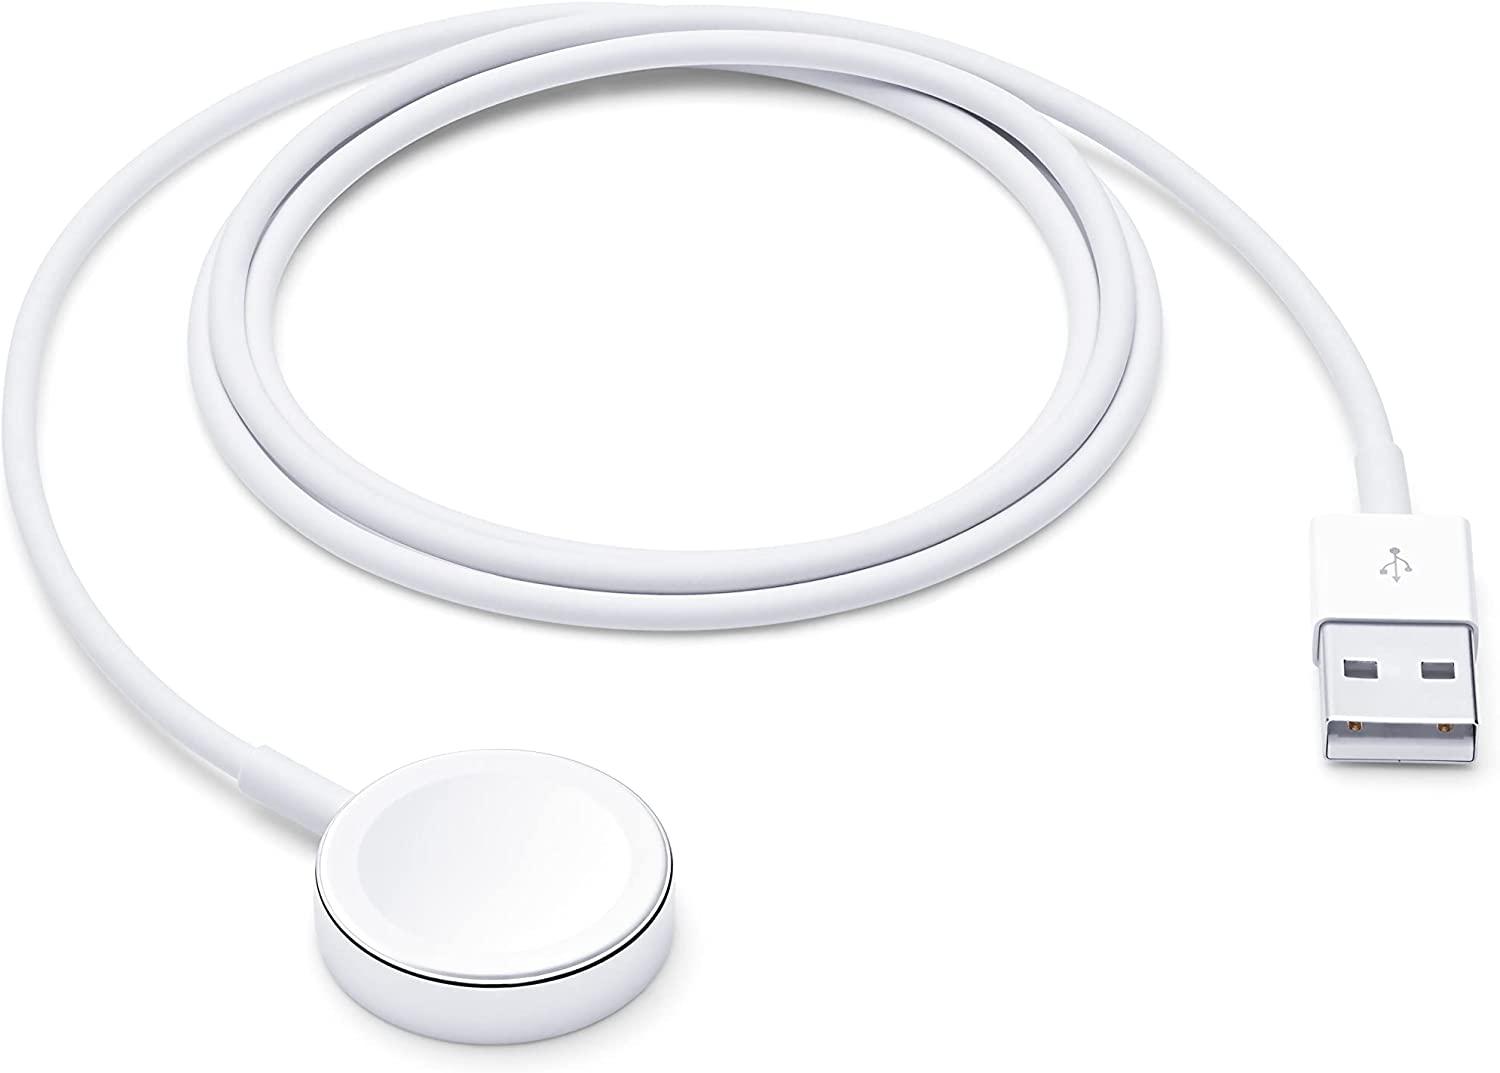 Apple Watch Magnetic Charging Cable Genuine for $14.55